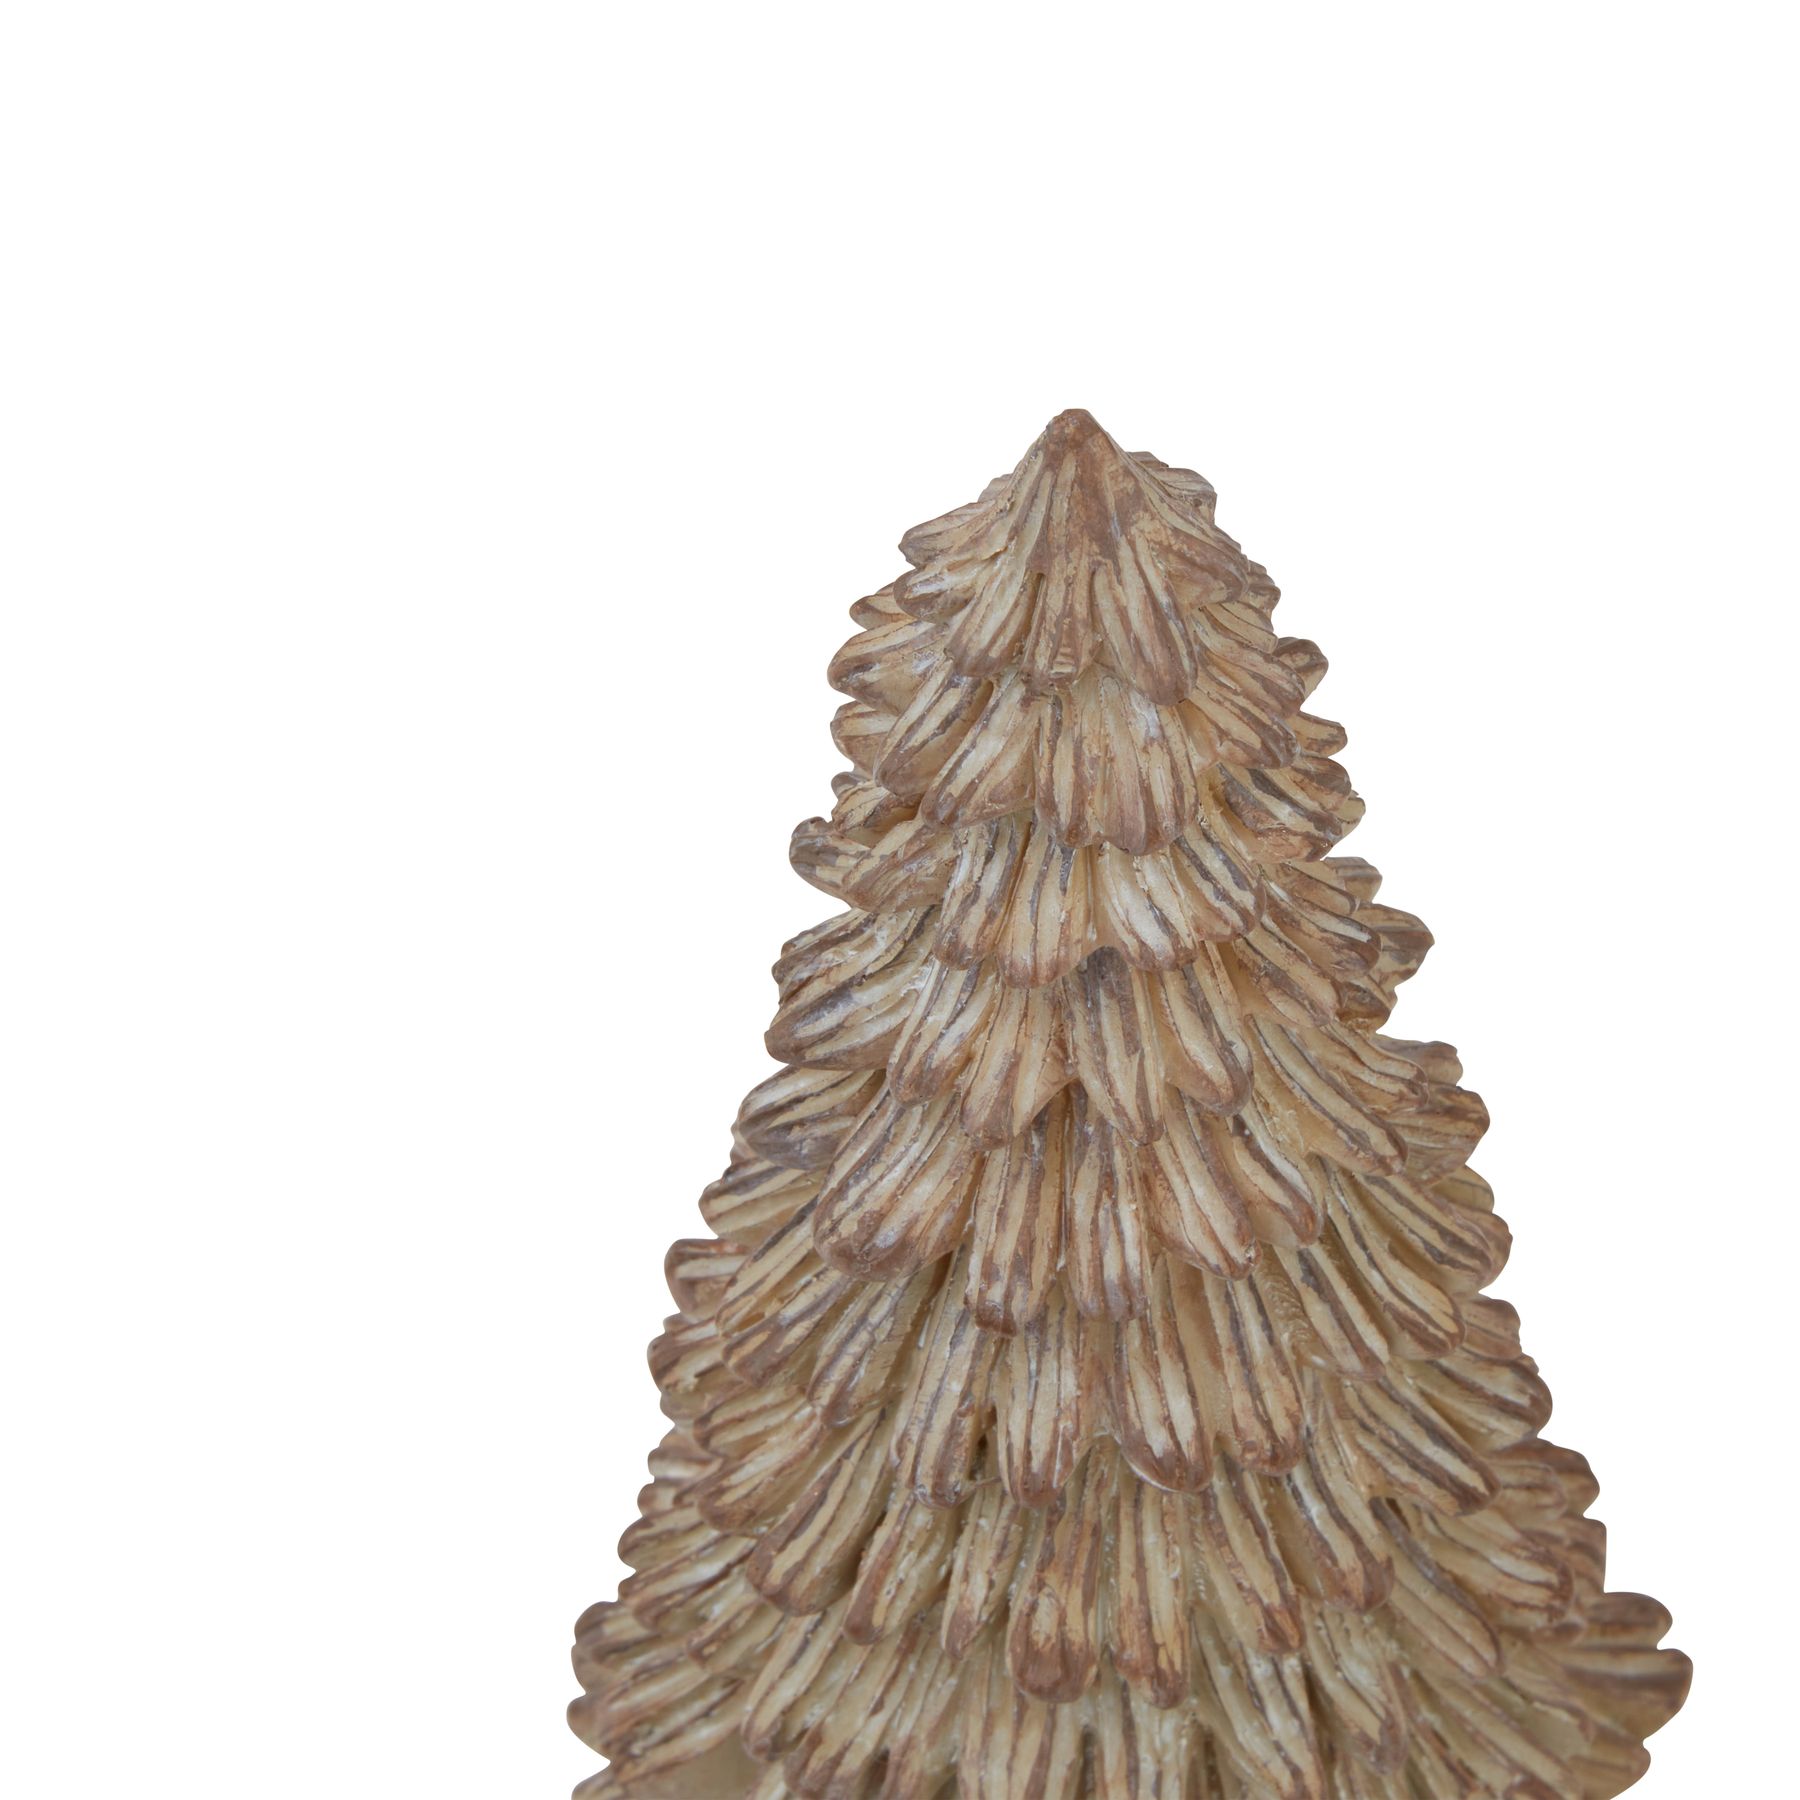 Small Pine Tree Sculpture - Image 2